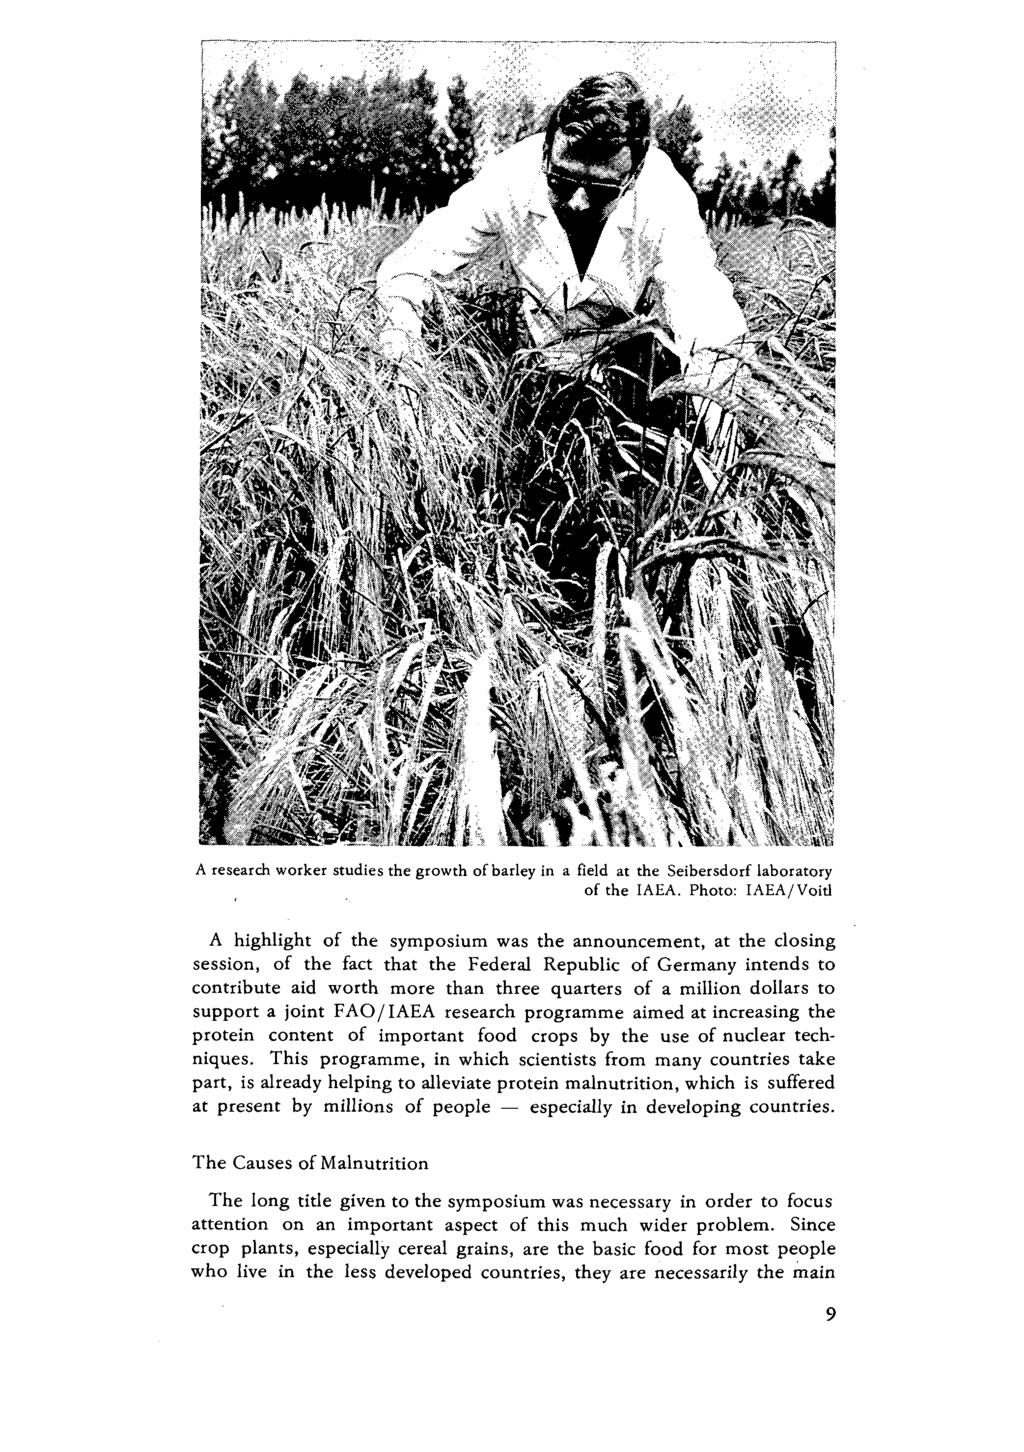 A research worker studies the growth of barley in a field at the Seibersdorf laboratory of the IAEA.